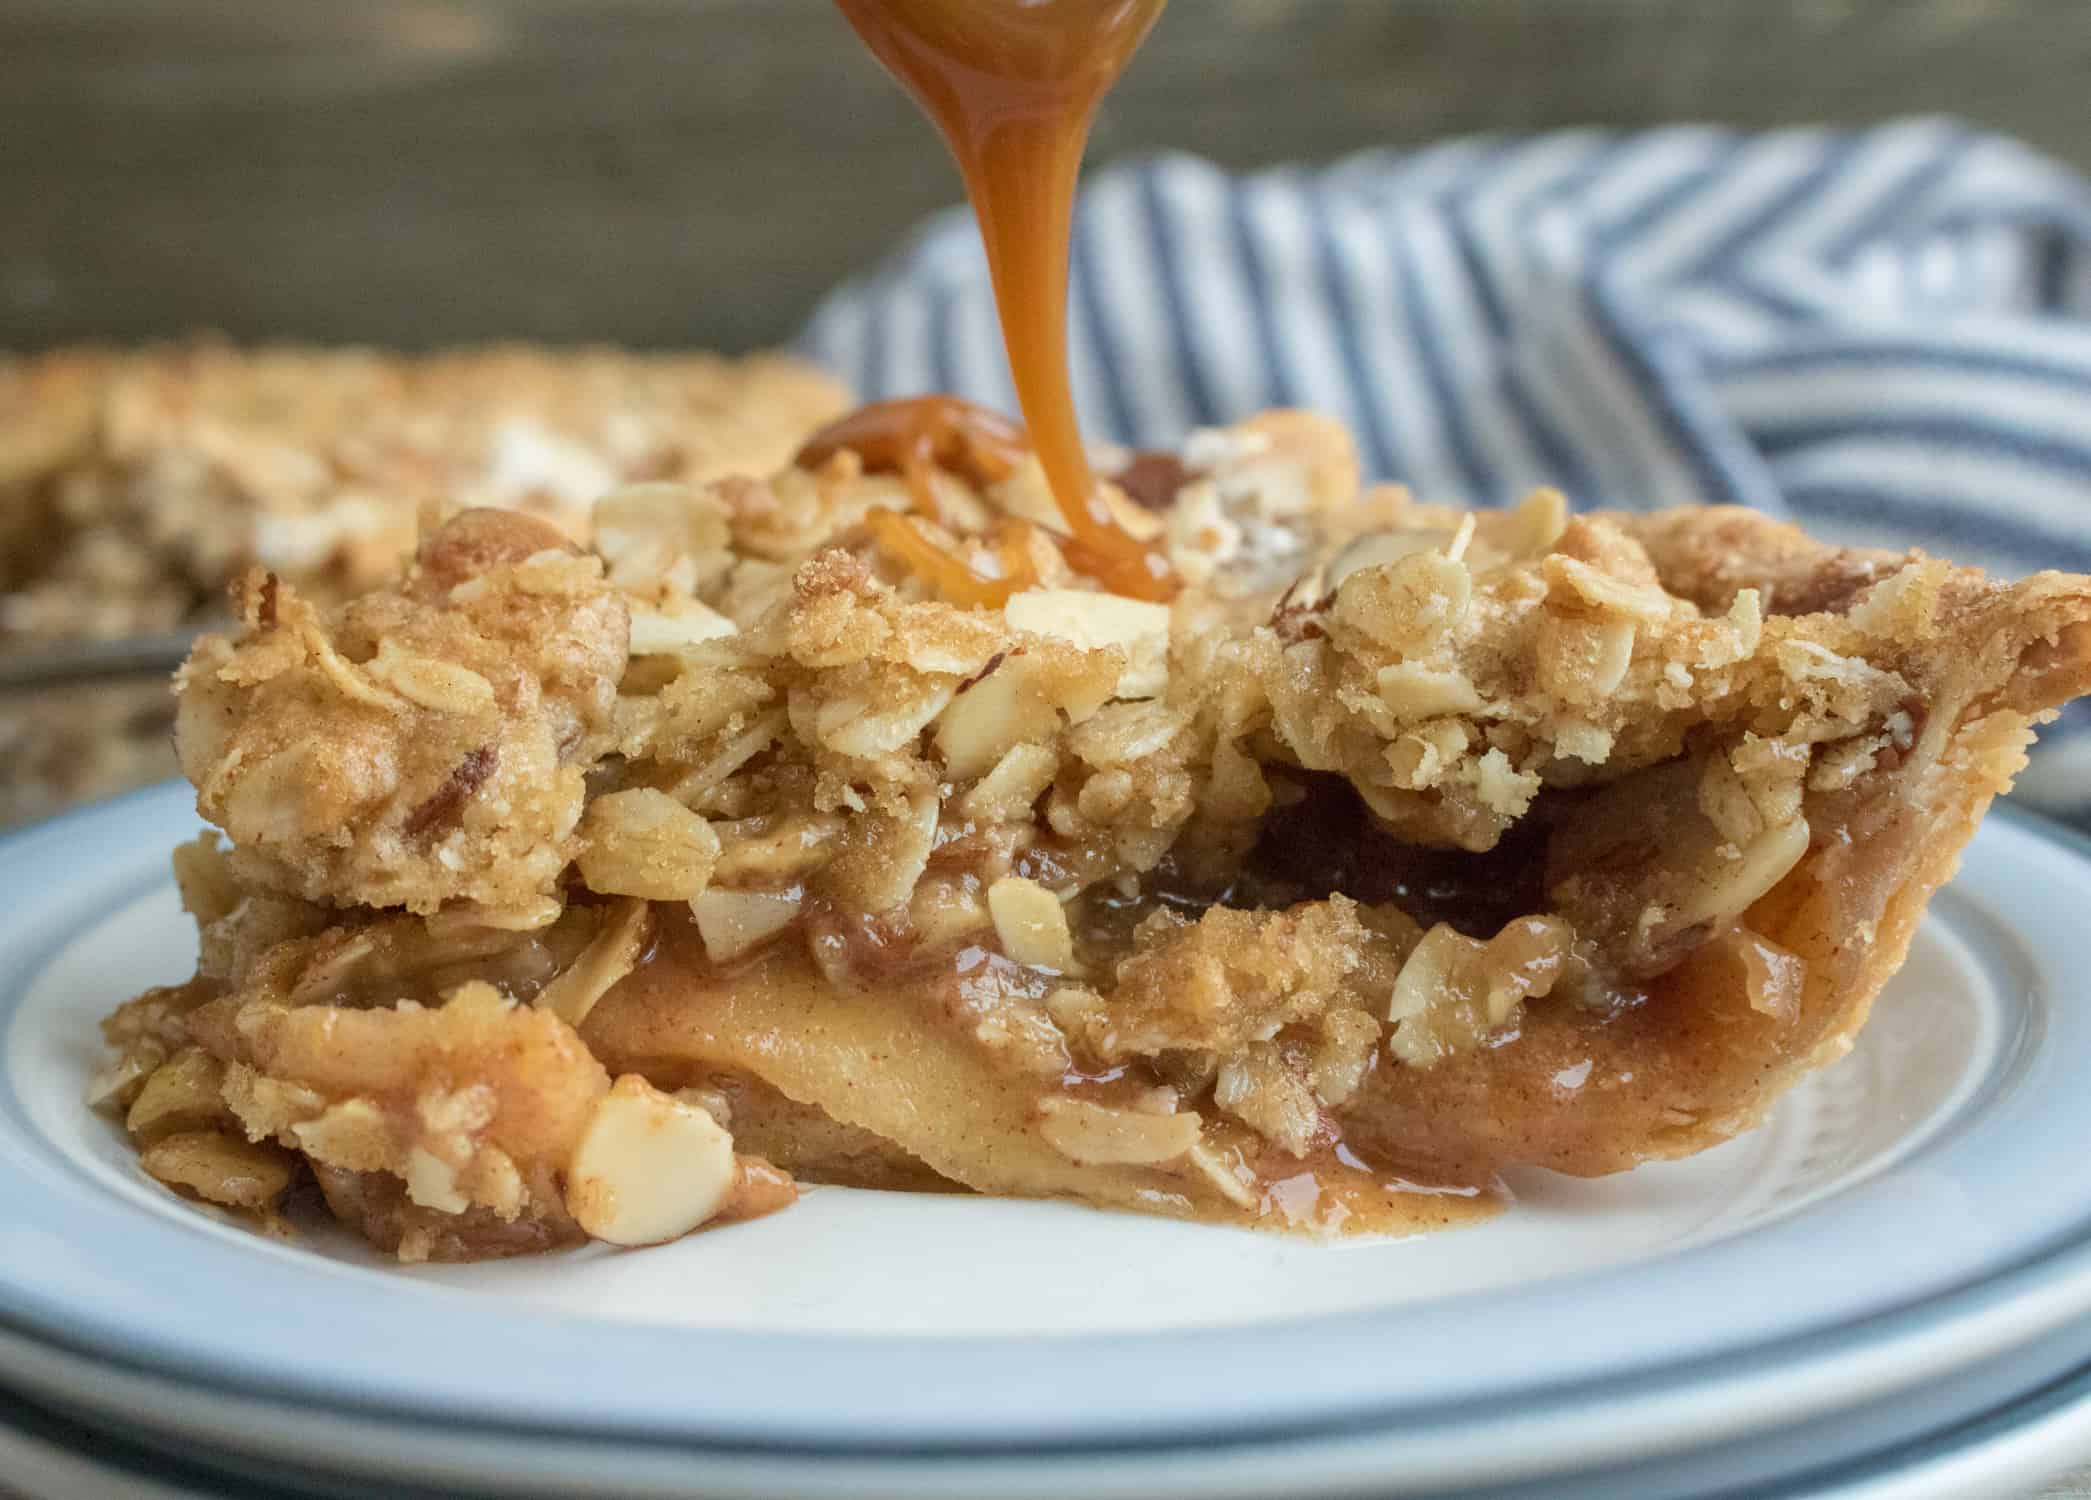 Caramel sauce being drizzled onto a slice of Caramel Apple Crumble Pie served on a white dessert plate 